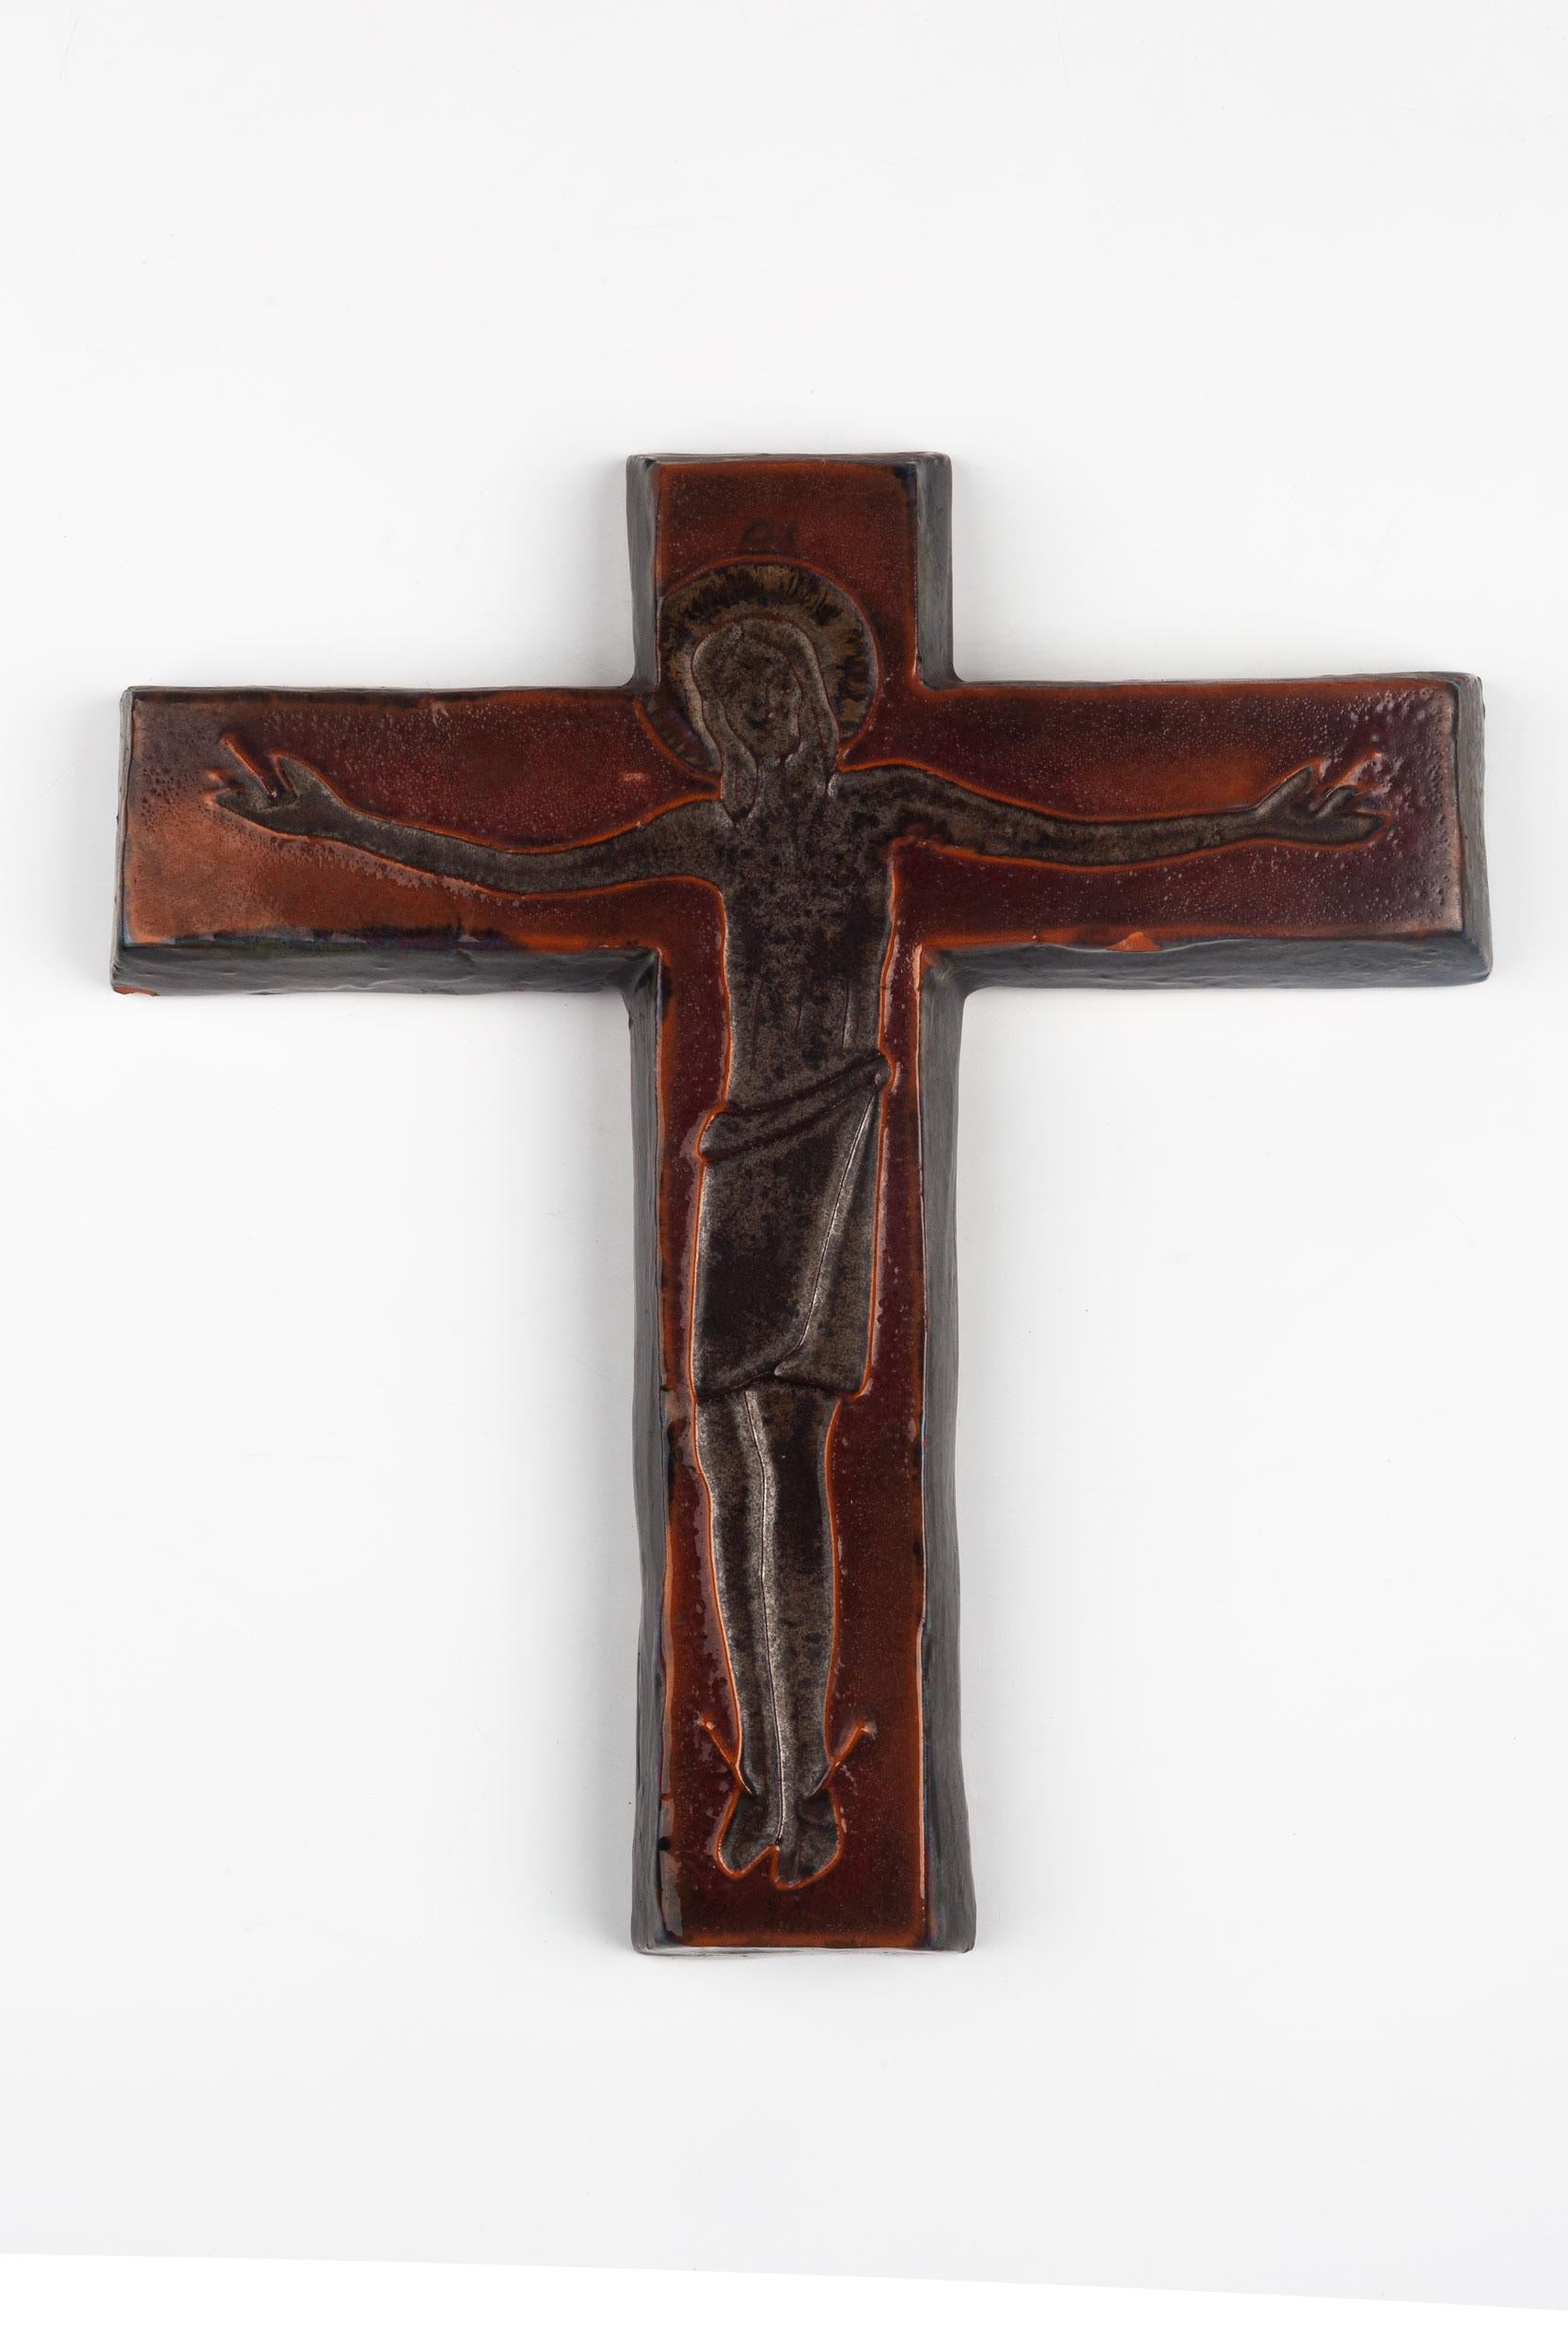 Dark rust tones of red and orange in this ceramic European wall crucifix glazed in semi-gloss. Christ figure realized in lined volumes . A one-of-a-kind, handcrafted piece that is part of a large collection of European crosses made by artisan